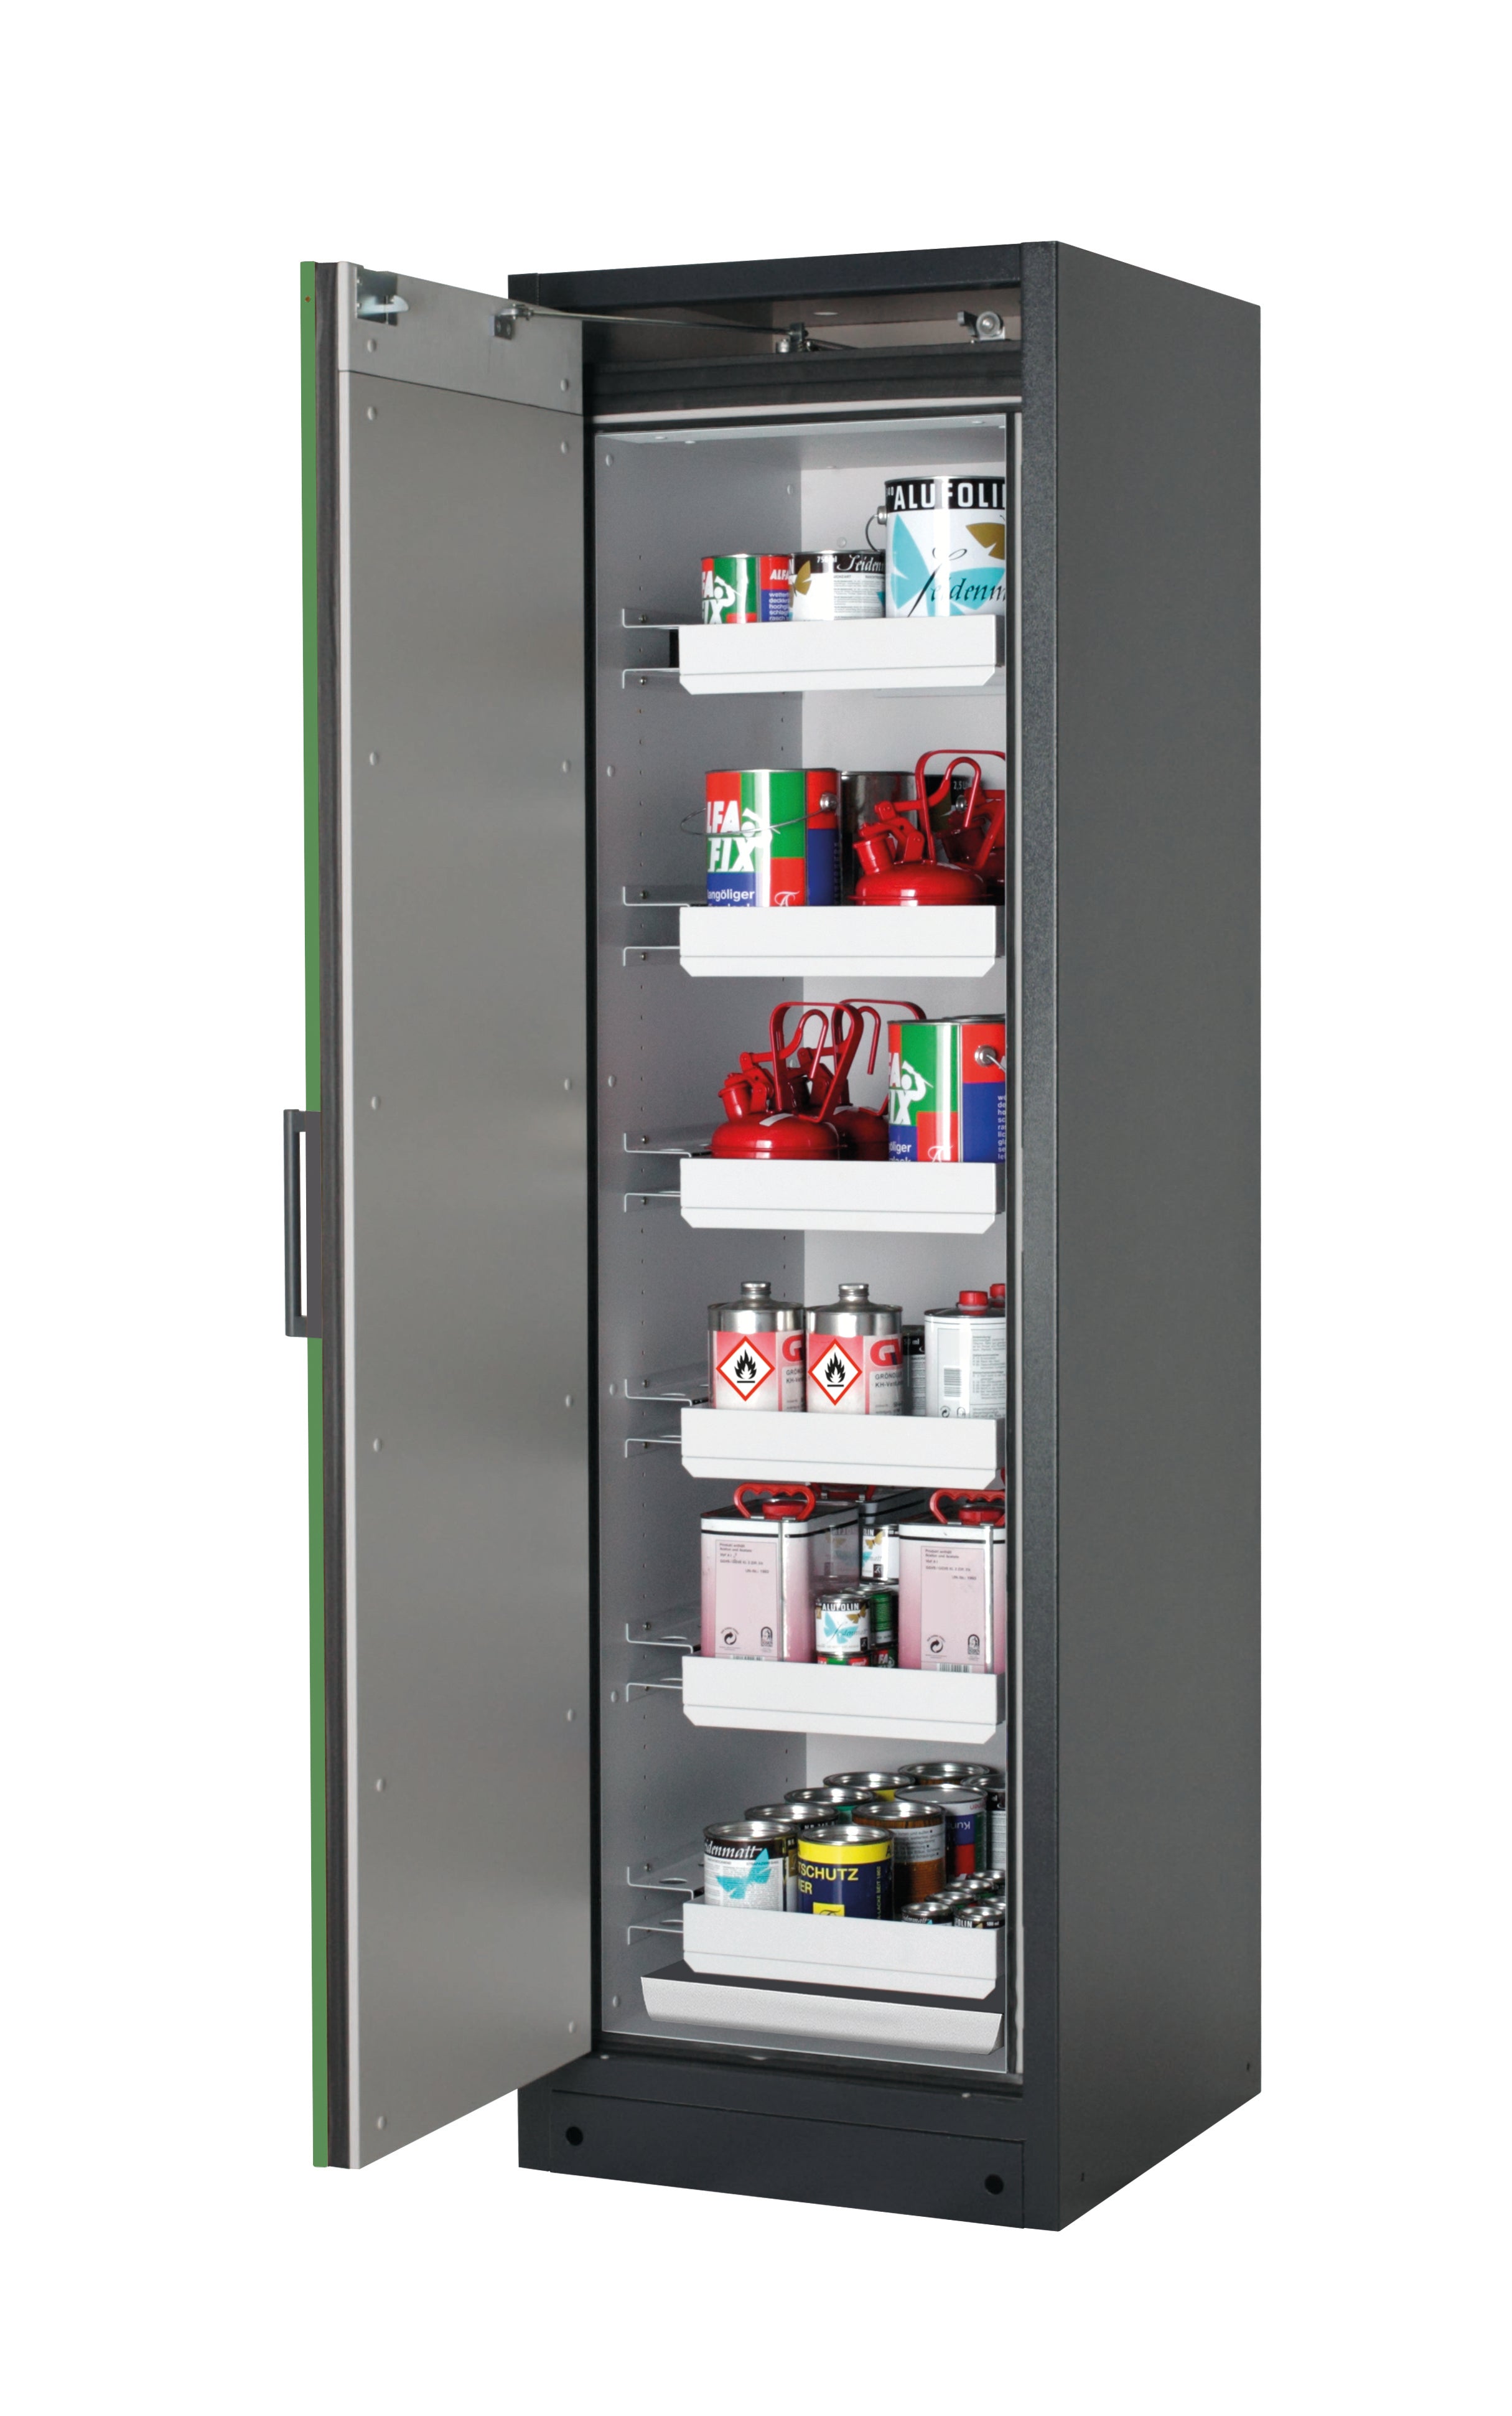 Type 90 safety storage cabinet Q-CLASSIC-90 model Q90.195.060 in reseda green RAL 6011 with 6x drawer (standard) (sheet steel),